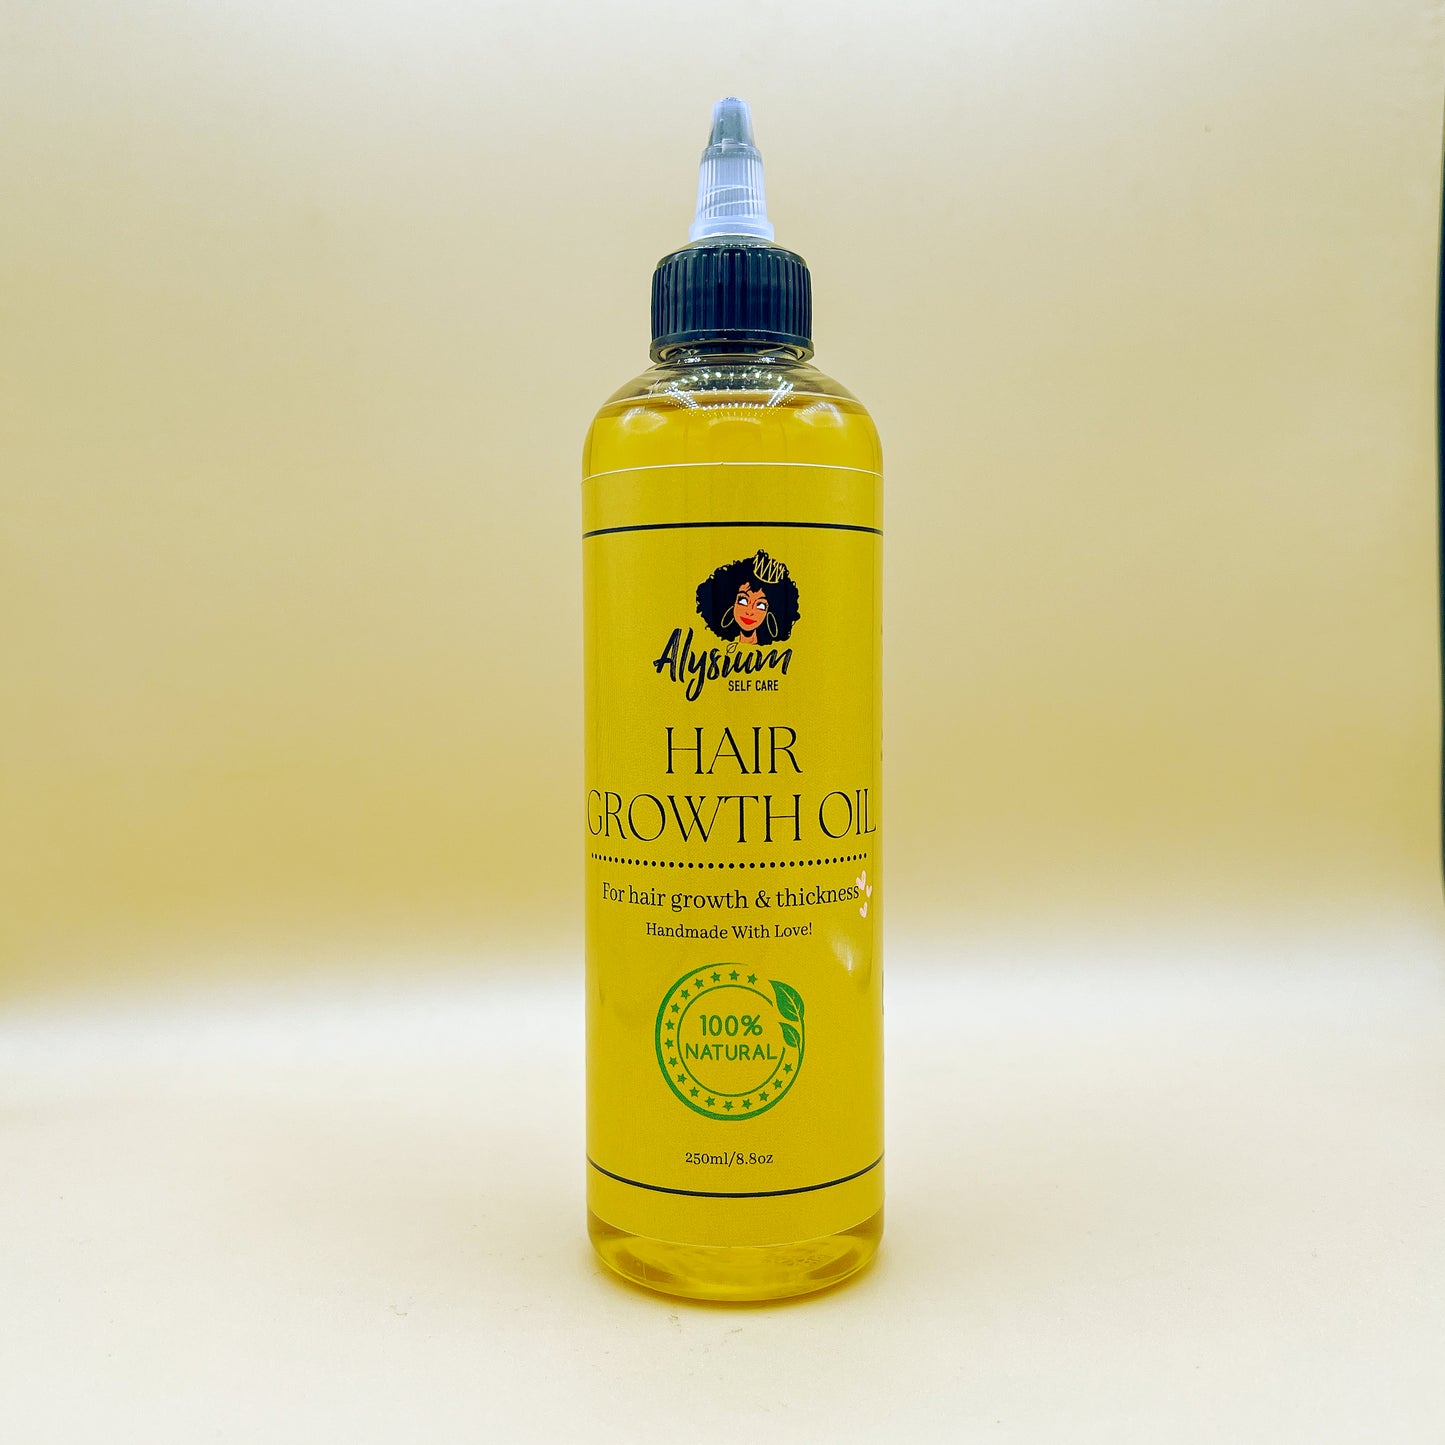 Hair Growth / Thickening Oil